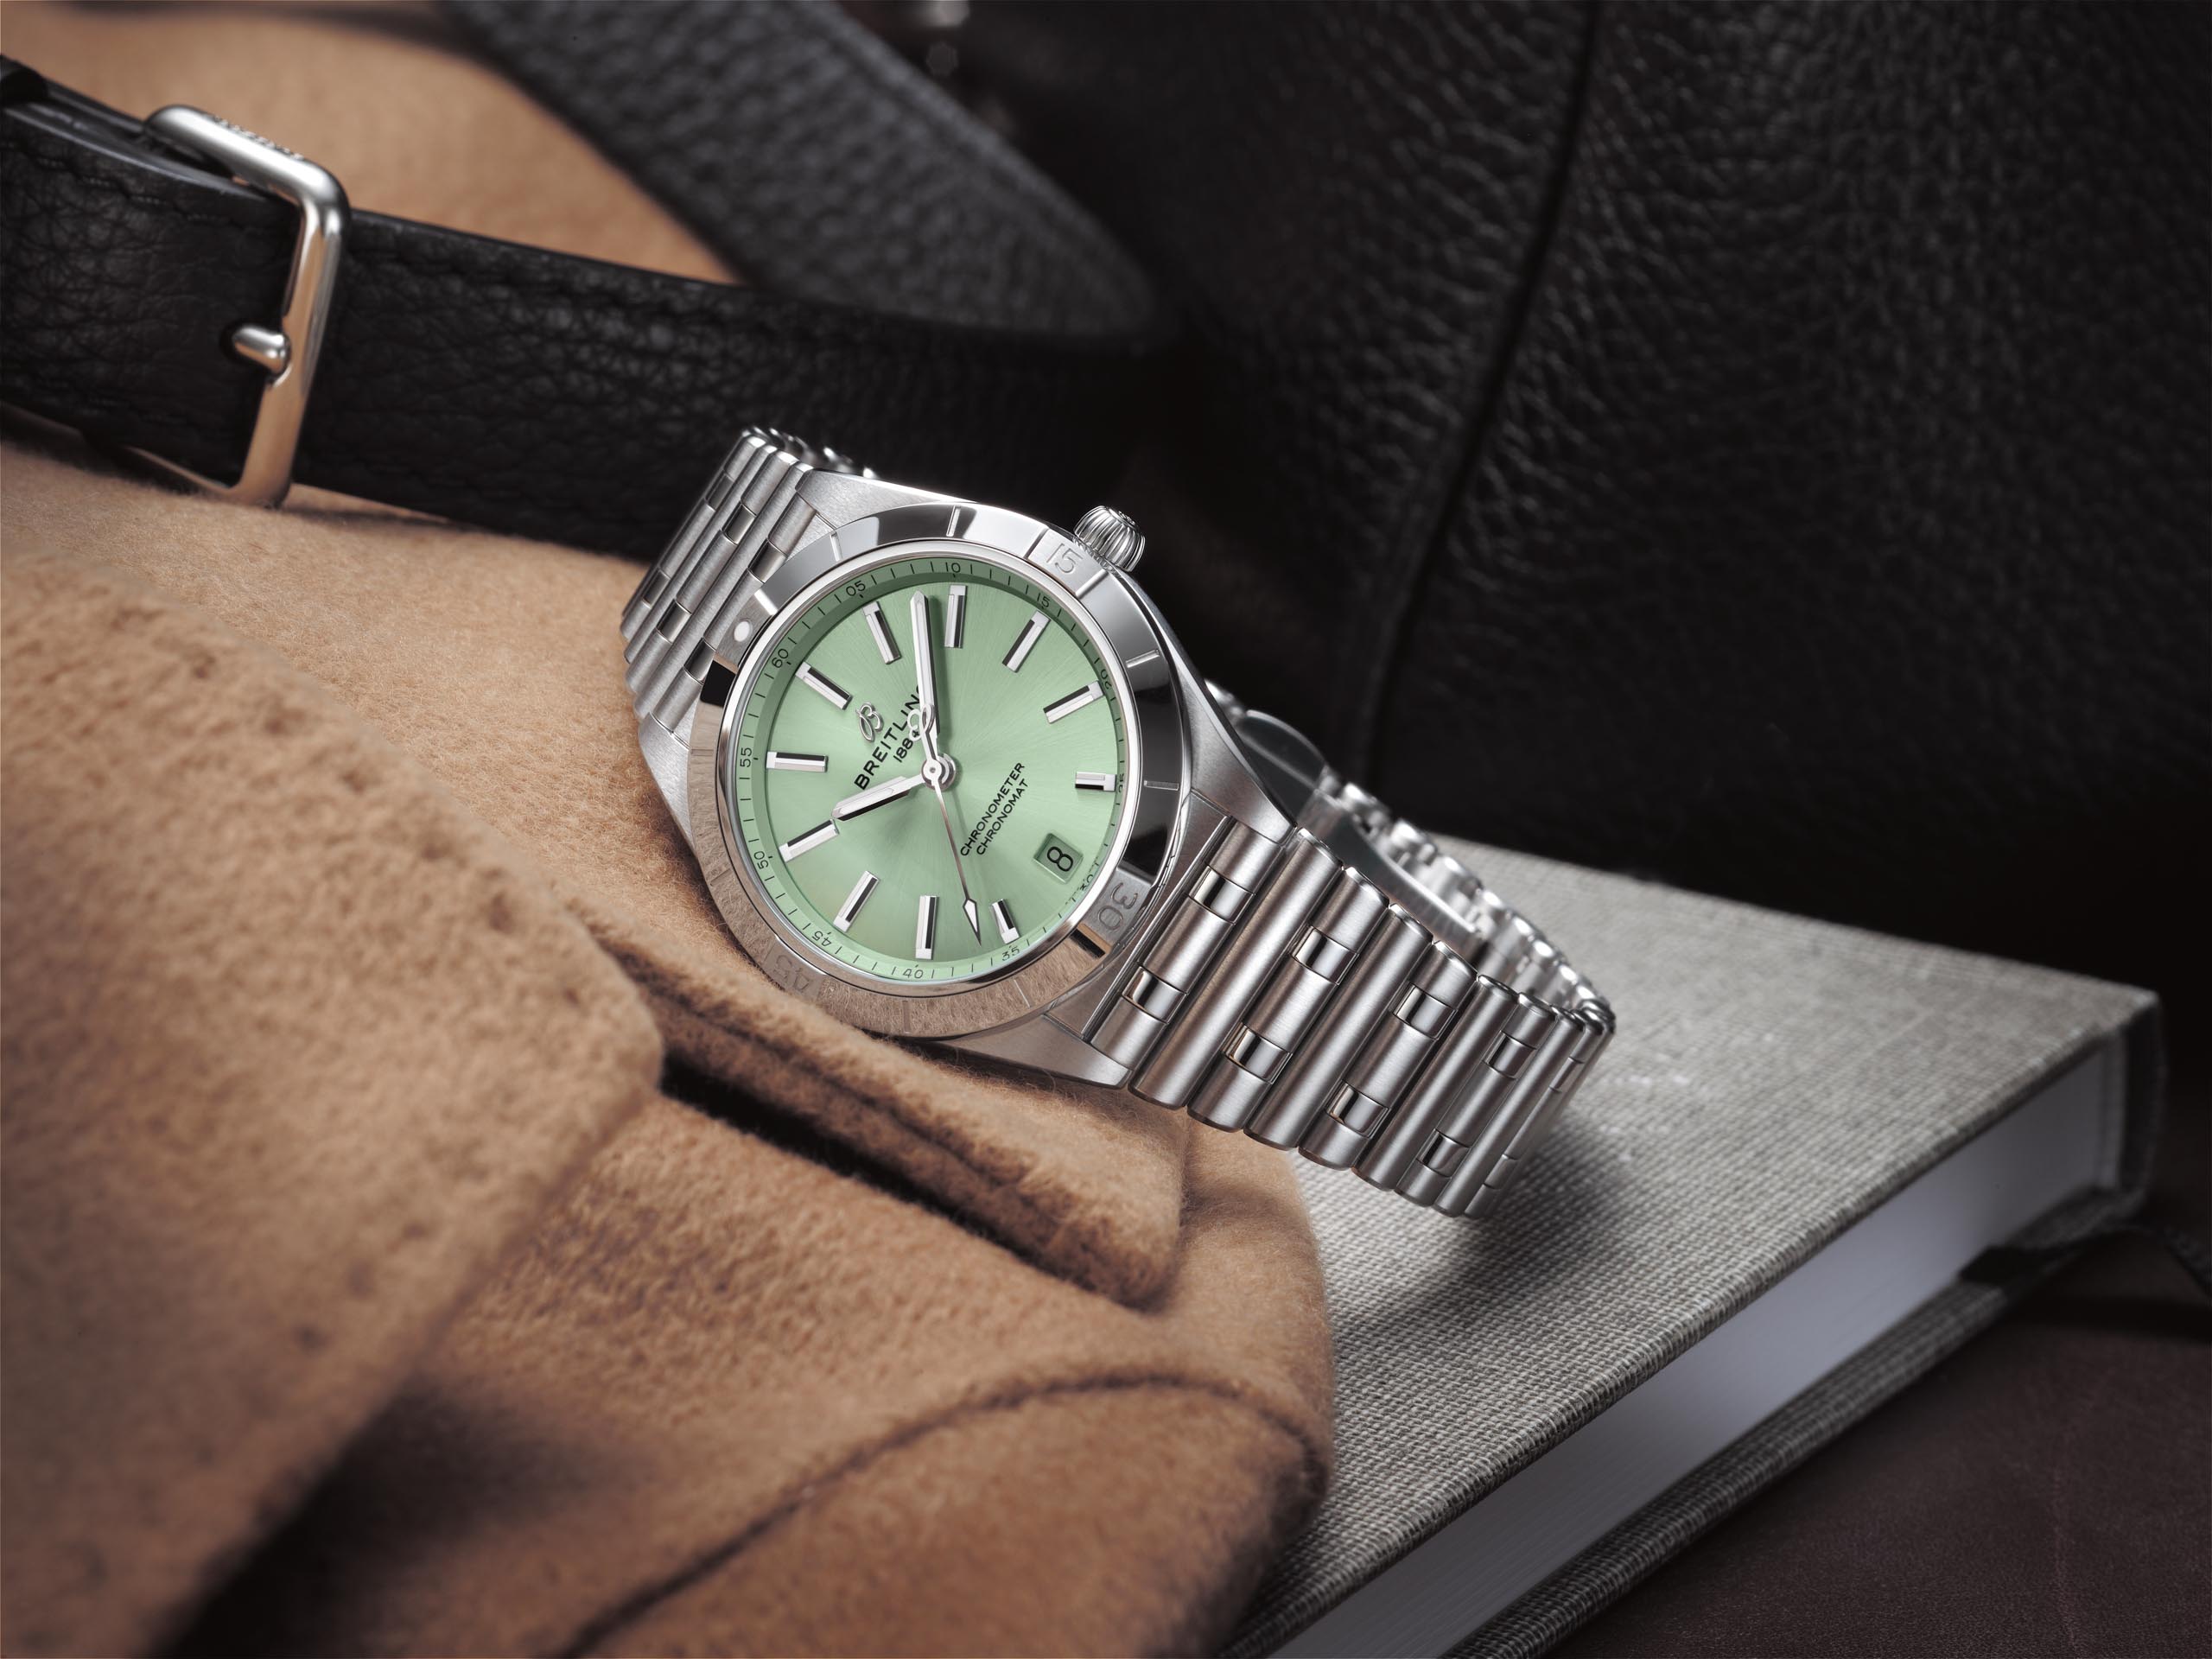 The elegant Breitling replica watch combines the sporty style and elegant tone.